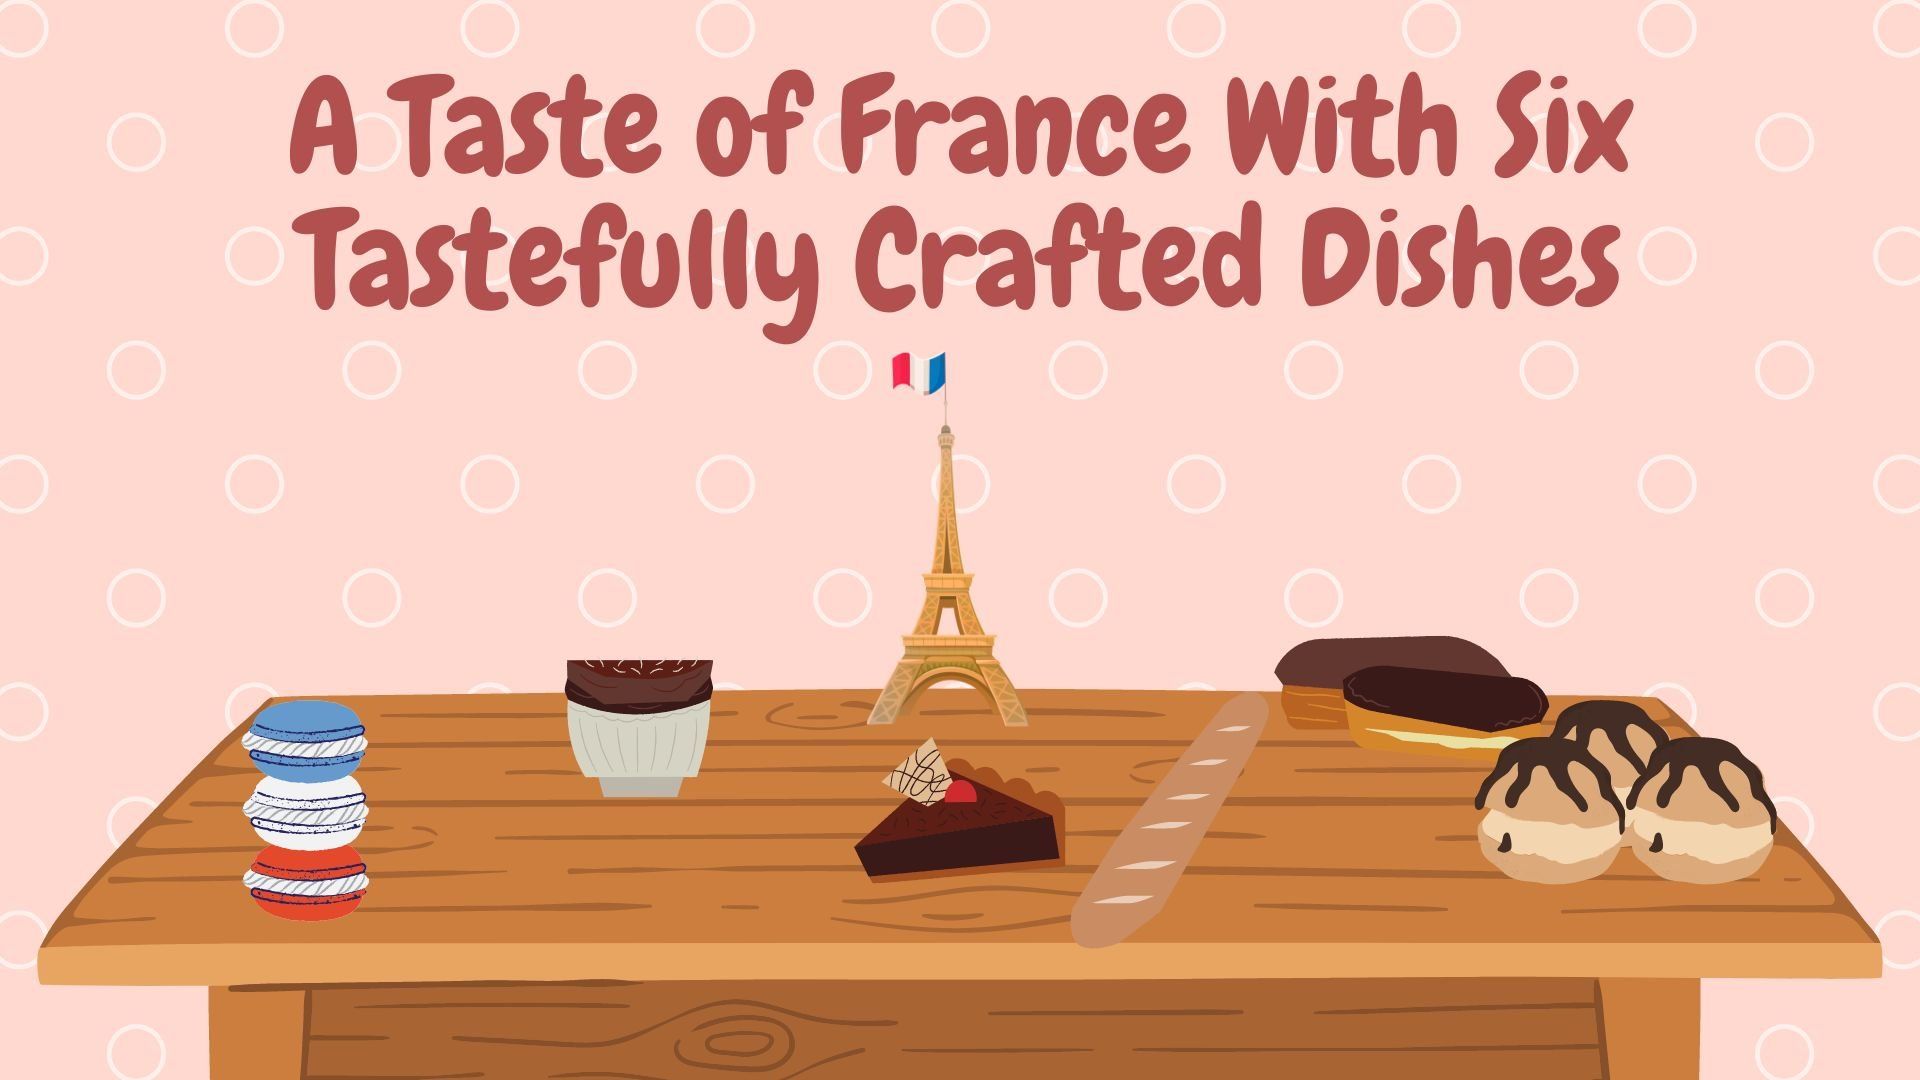 A Taste of France With Six Tastefully Crafted Dishes